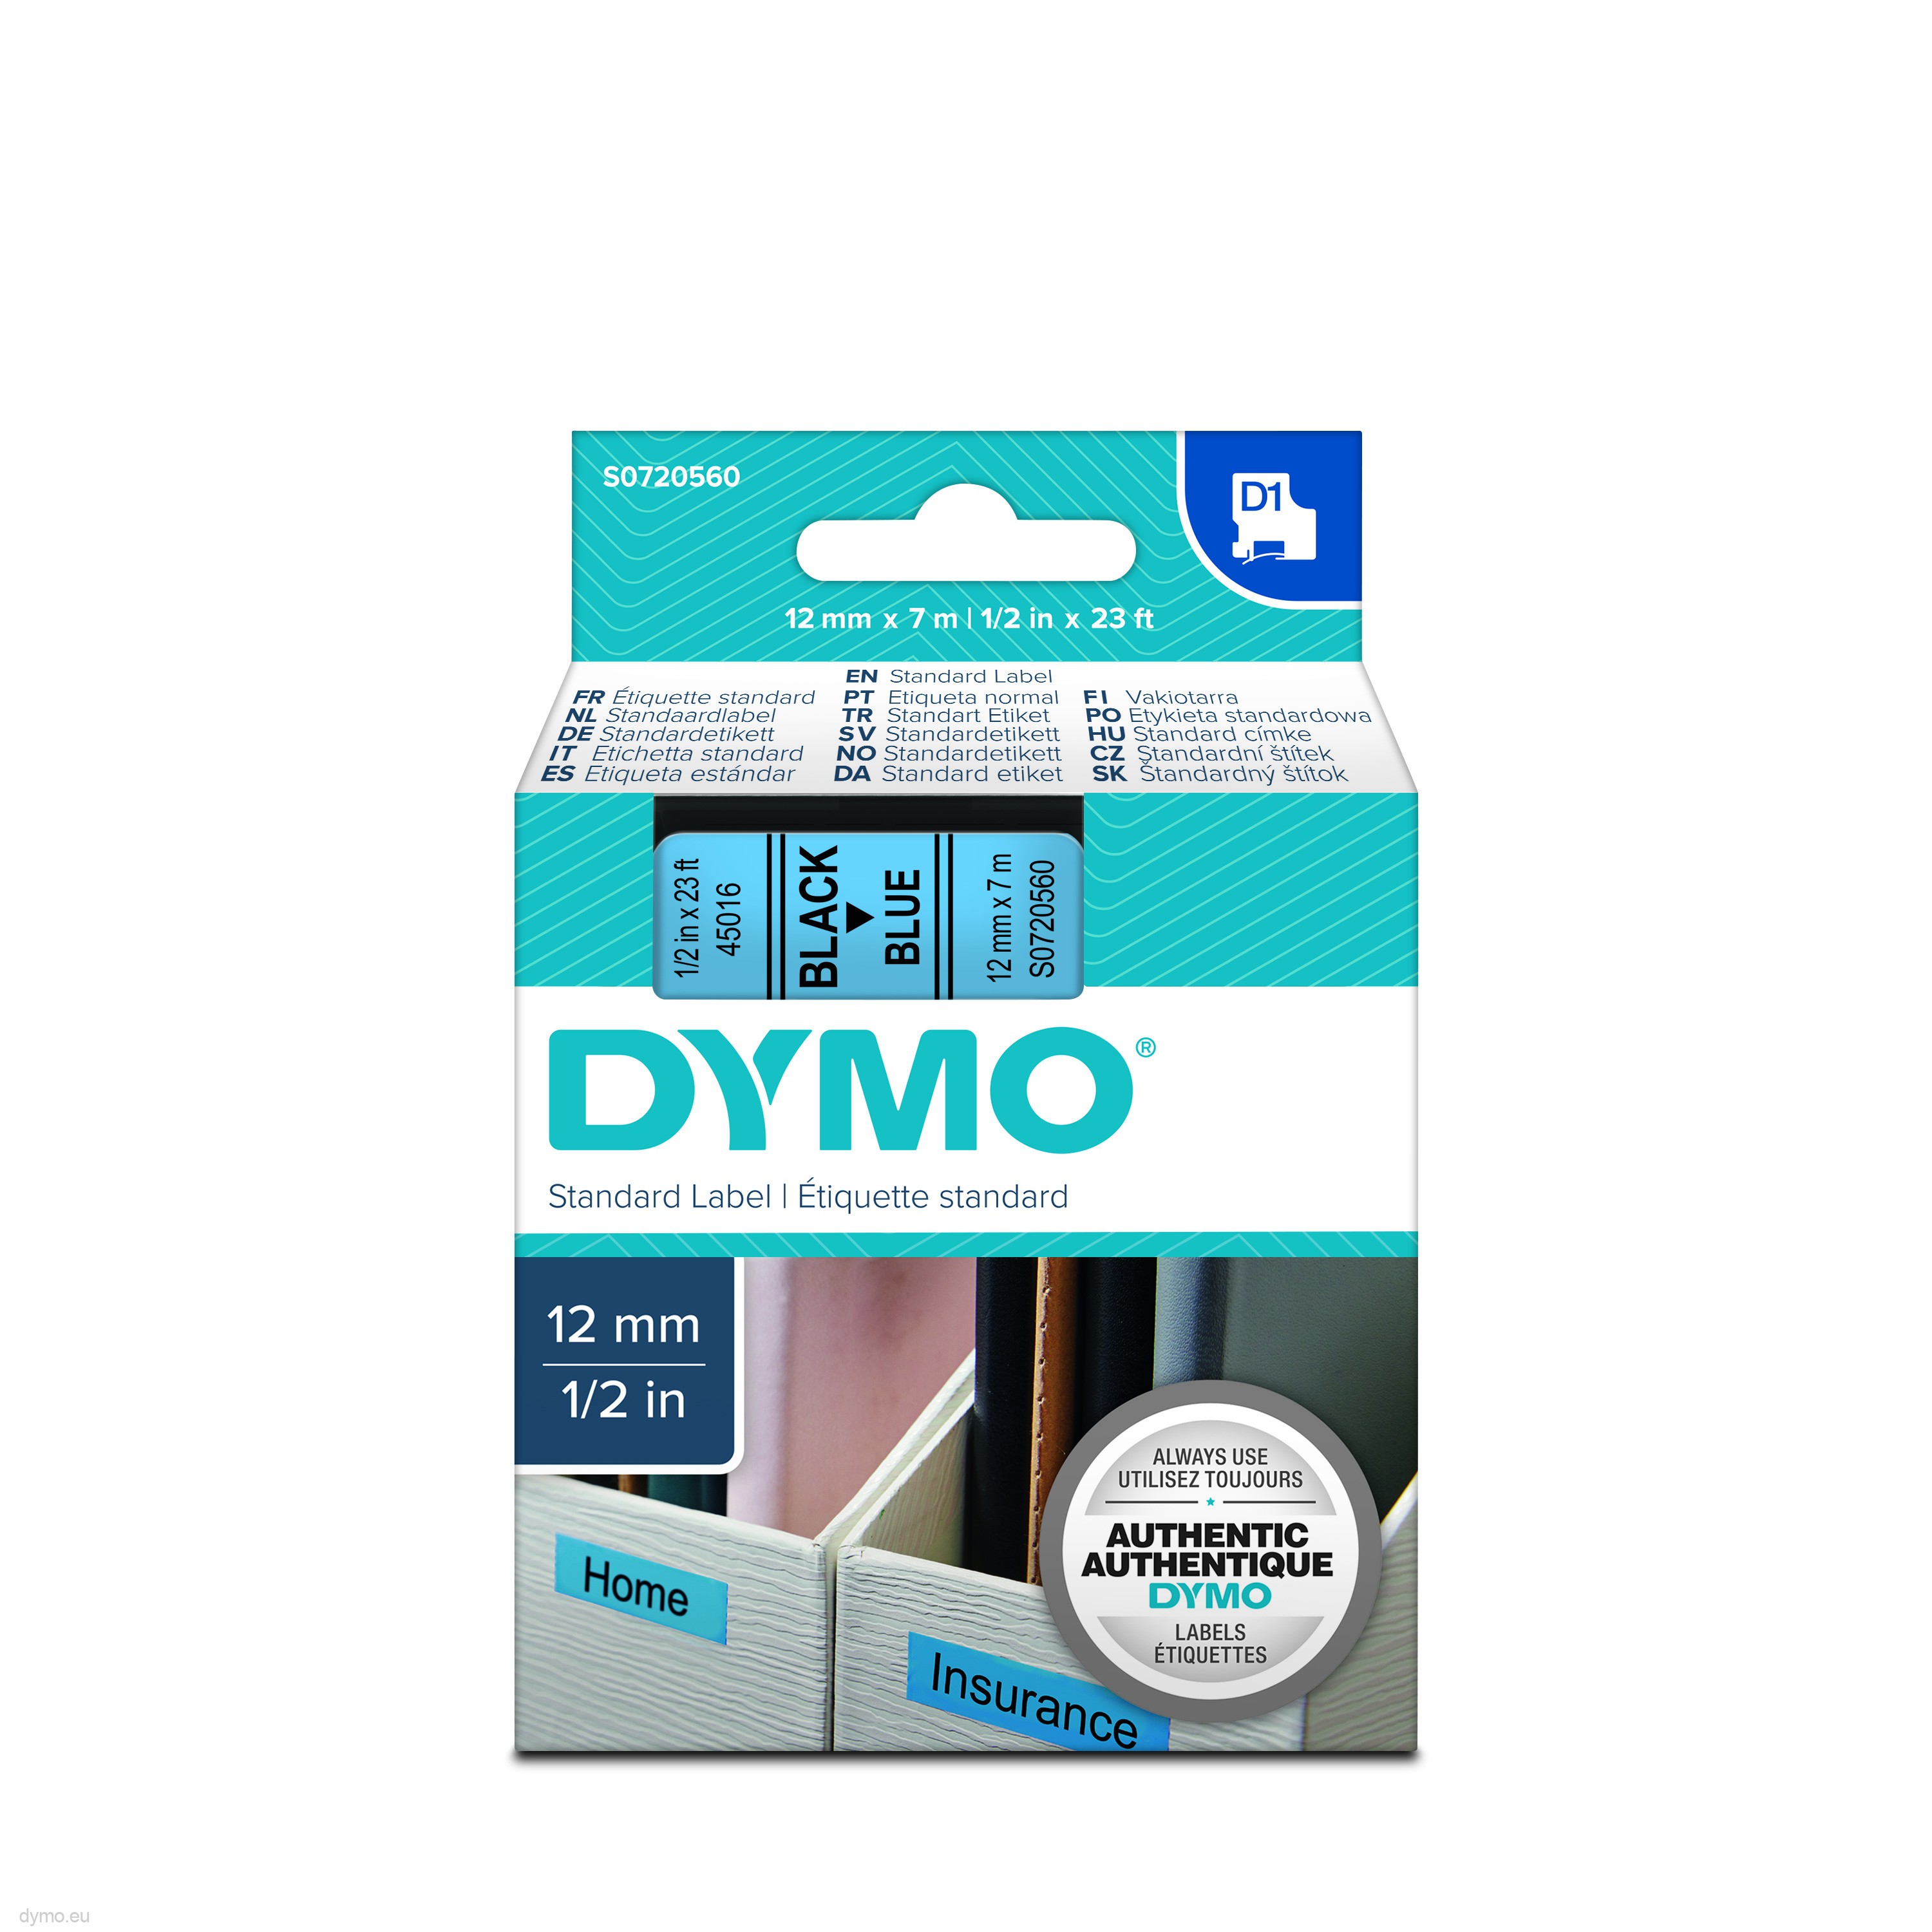 3X COMPATIBLE DYMO D1 SERIES STANDARD LABELLING TAPES 12mm X 7m BLACK ON BLUE 45016 